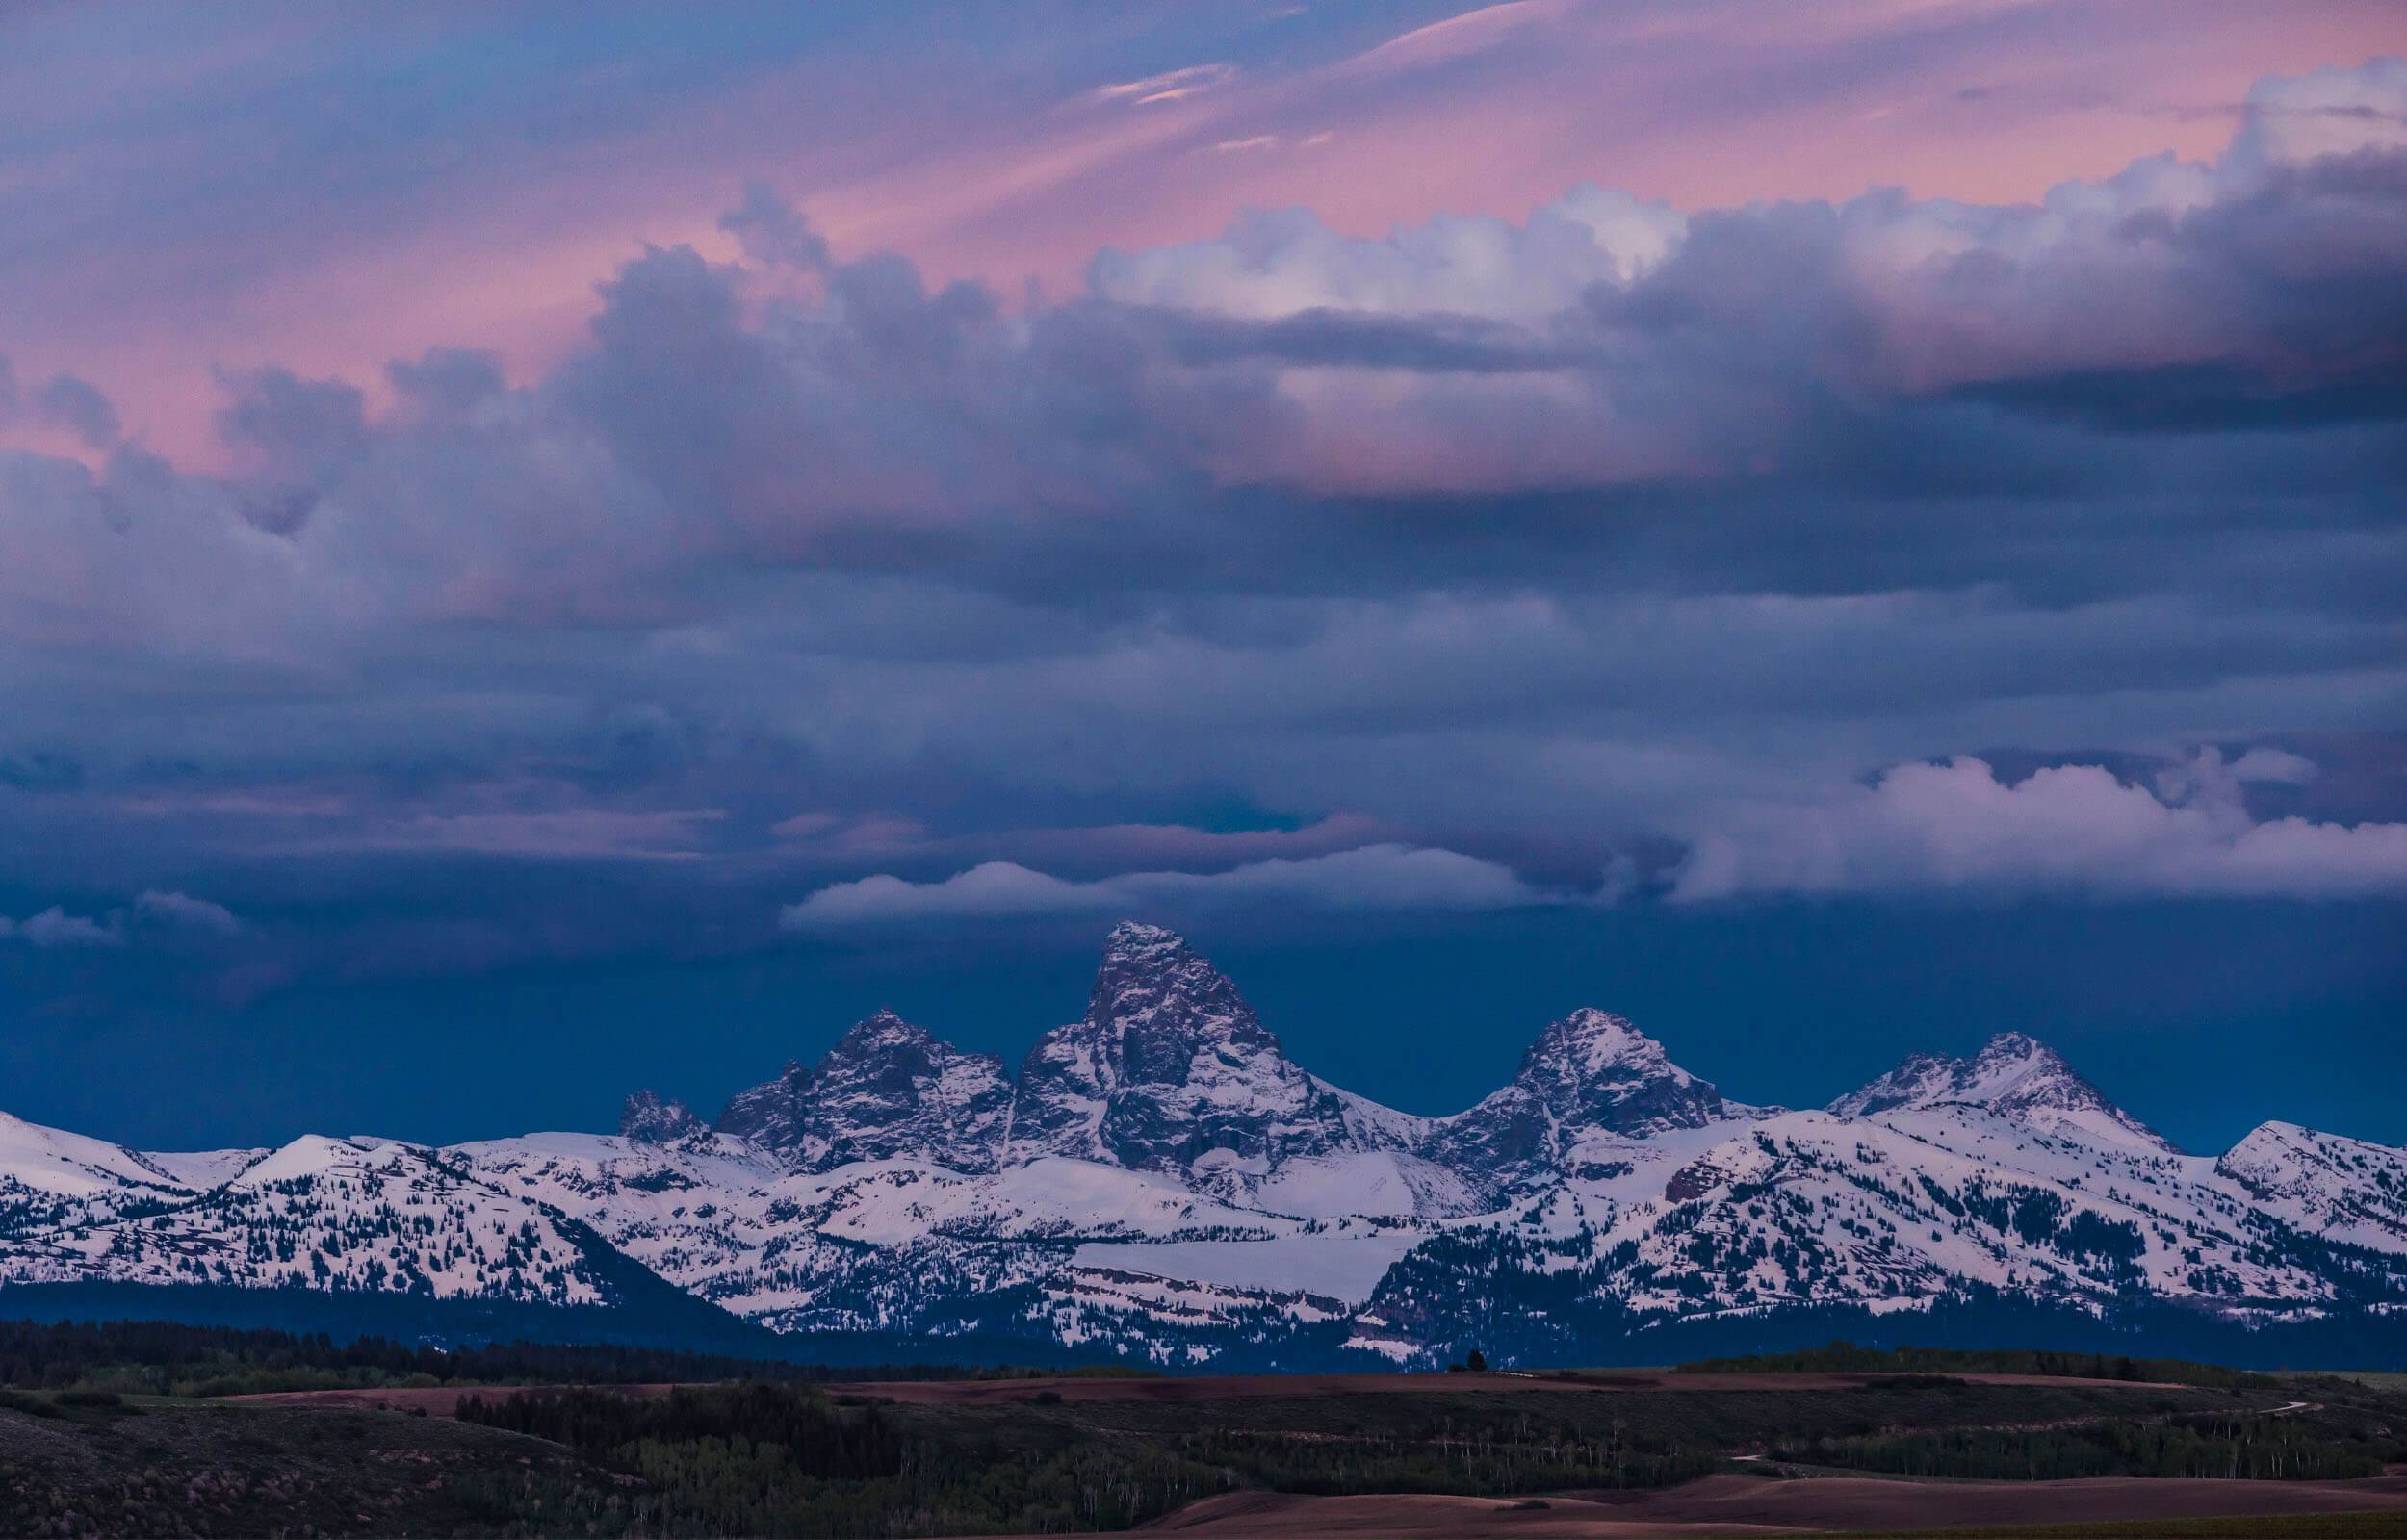 View of the Teton Mountains at sunset.